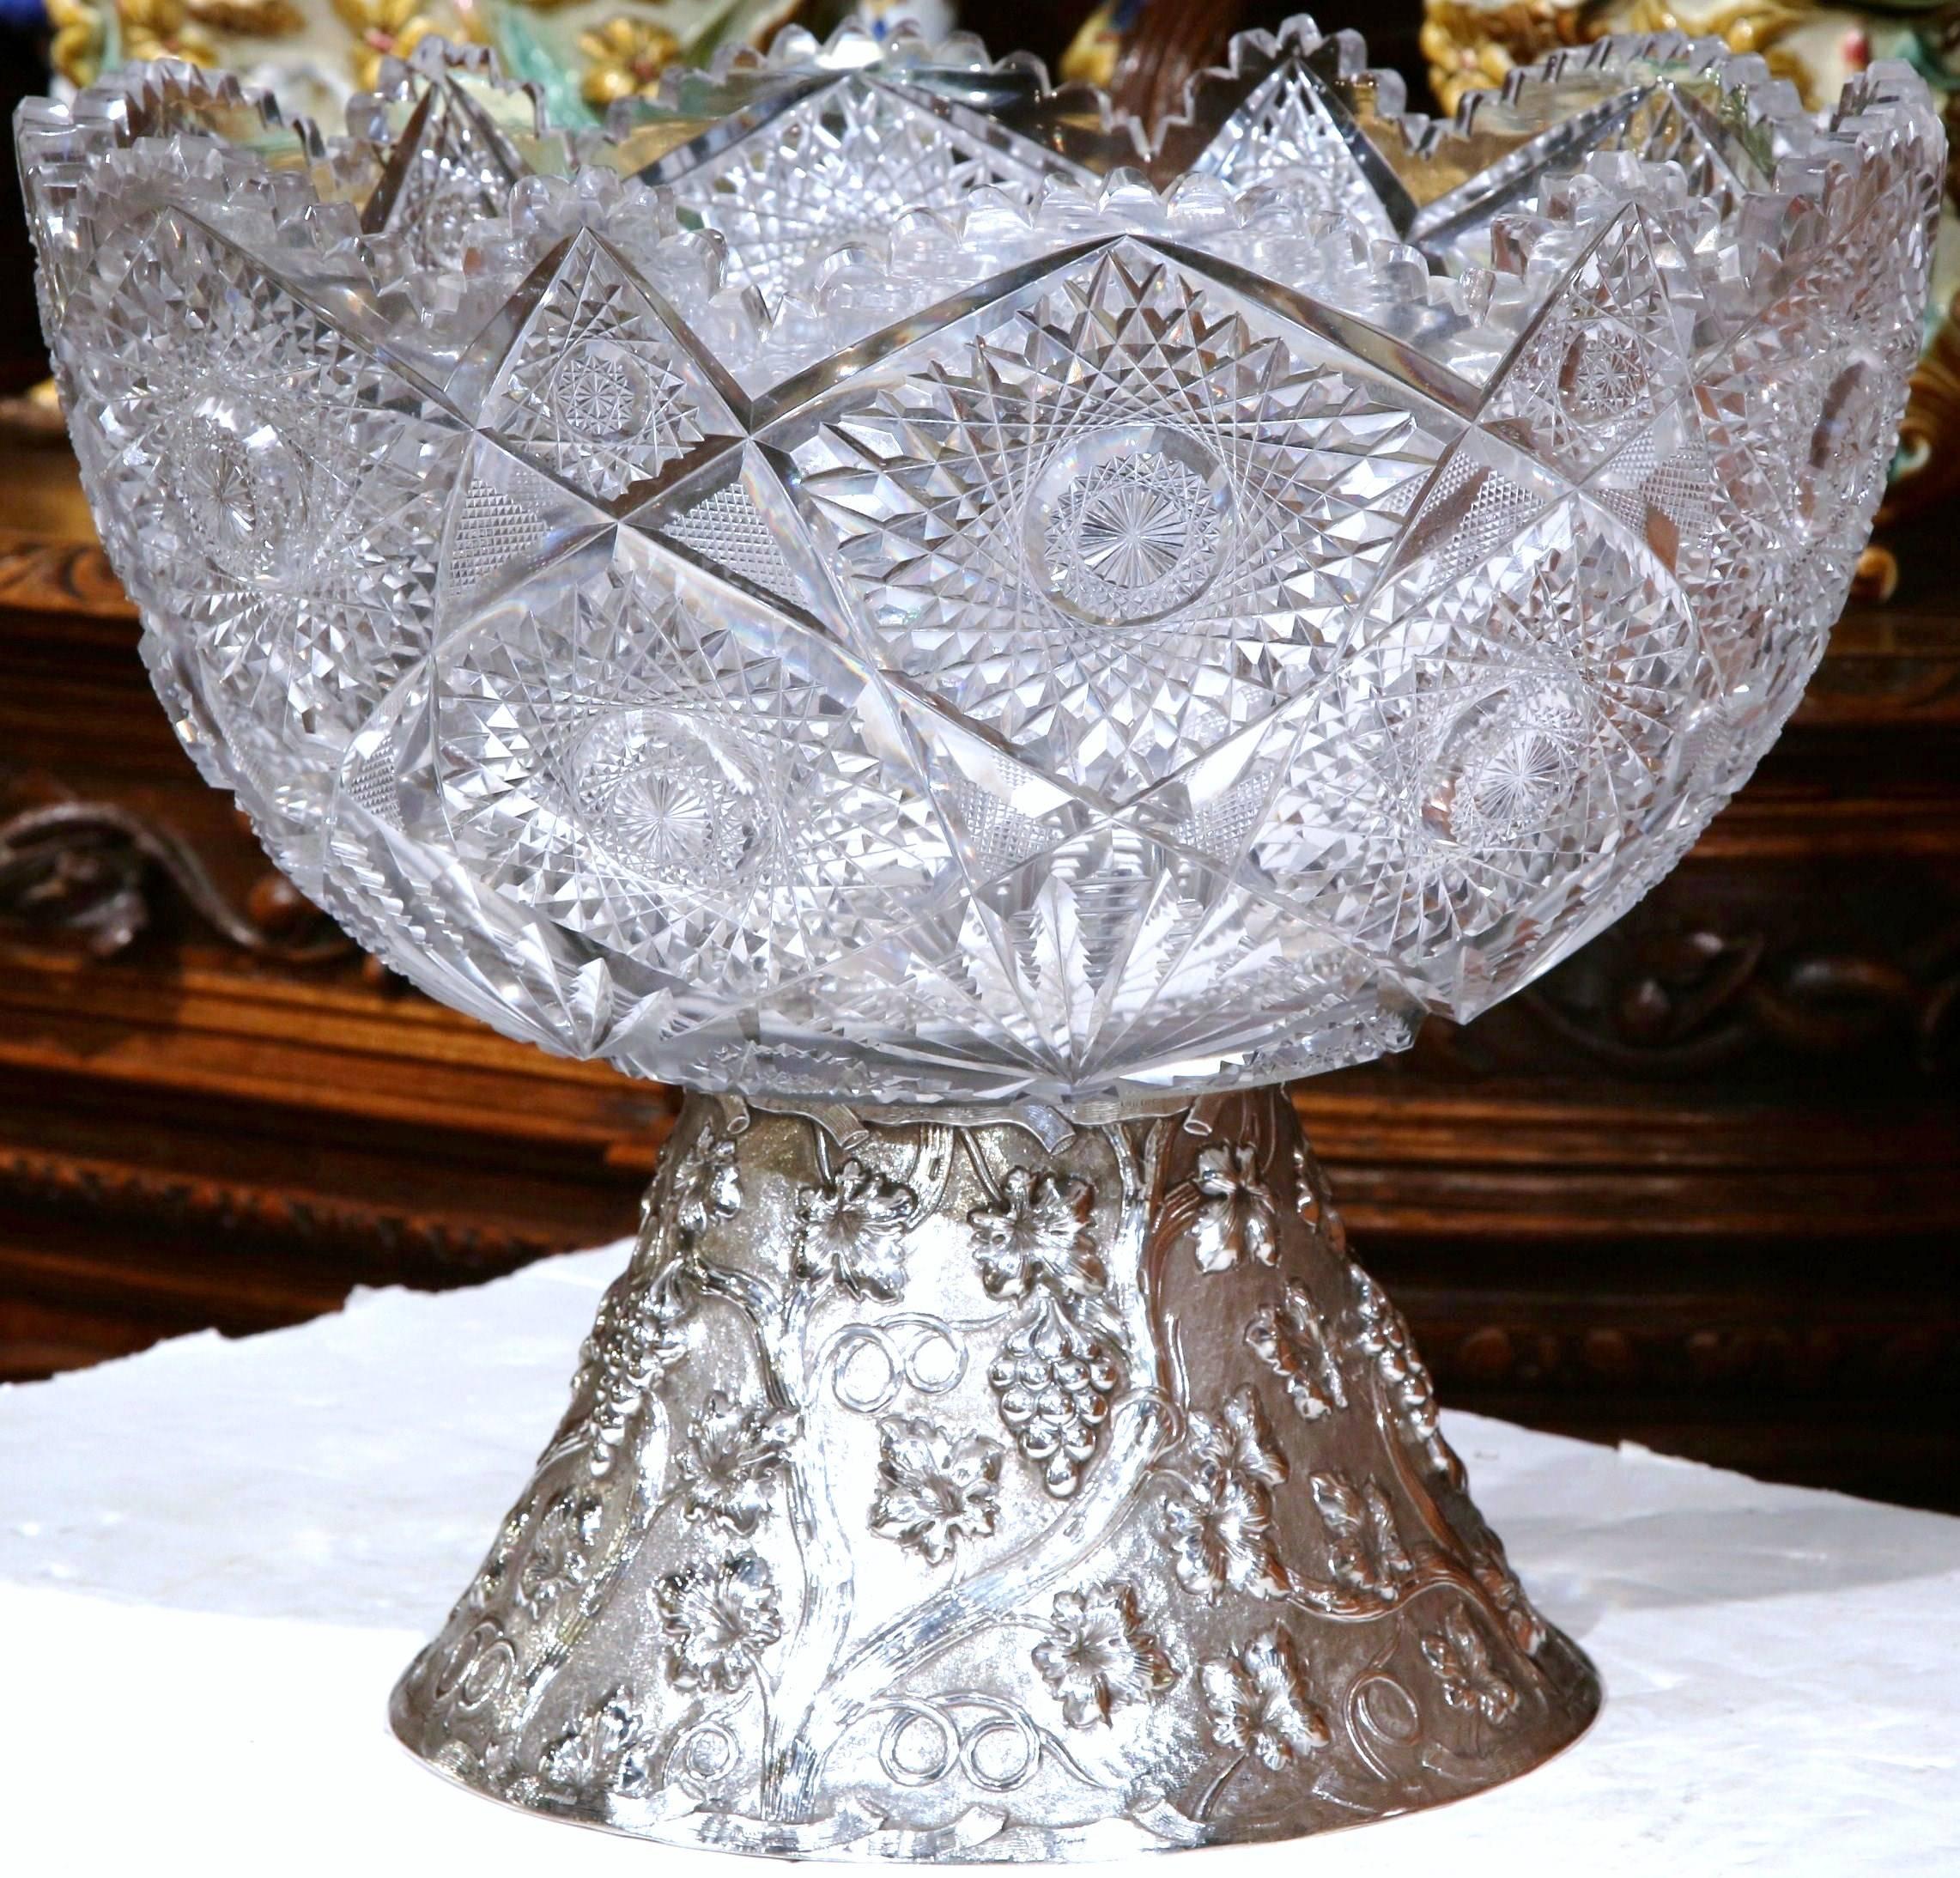 This elegant cut-glass punch bowl and separate silver repoussé base was crafted in France, circa 1890. The antique bar essential features a round cut-glass bowl with a scalloped edge sited on an intricate base with repoussé wine decor including